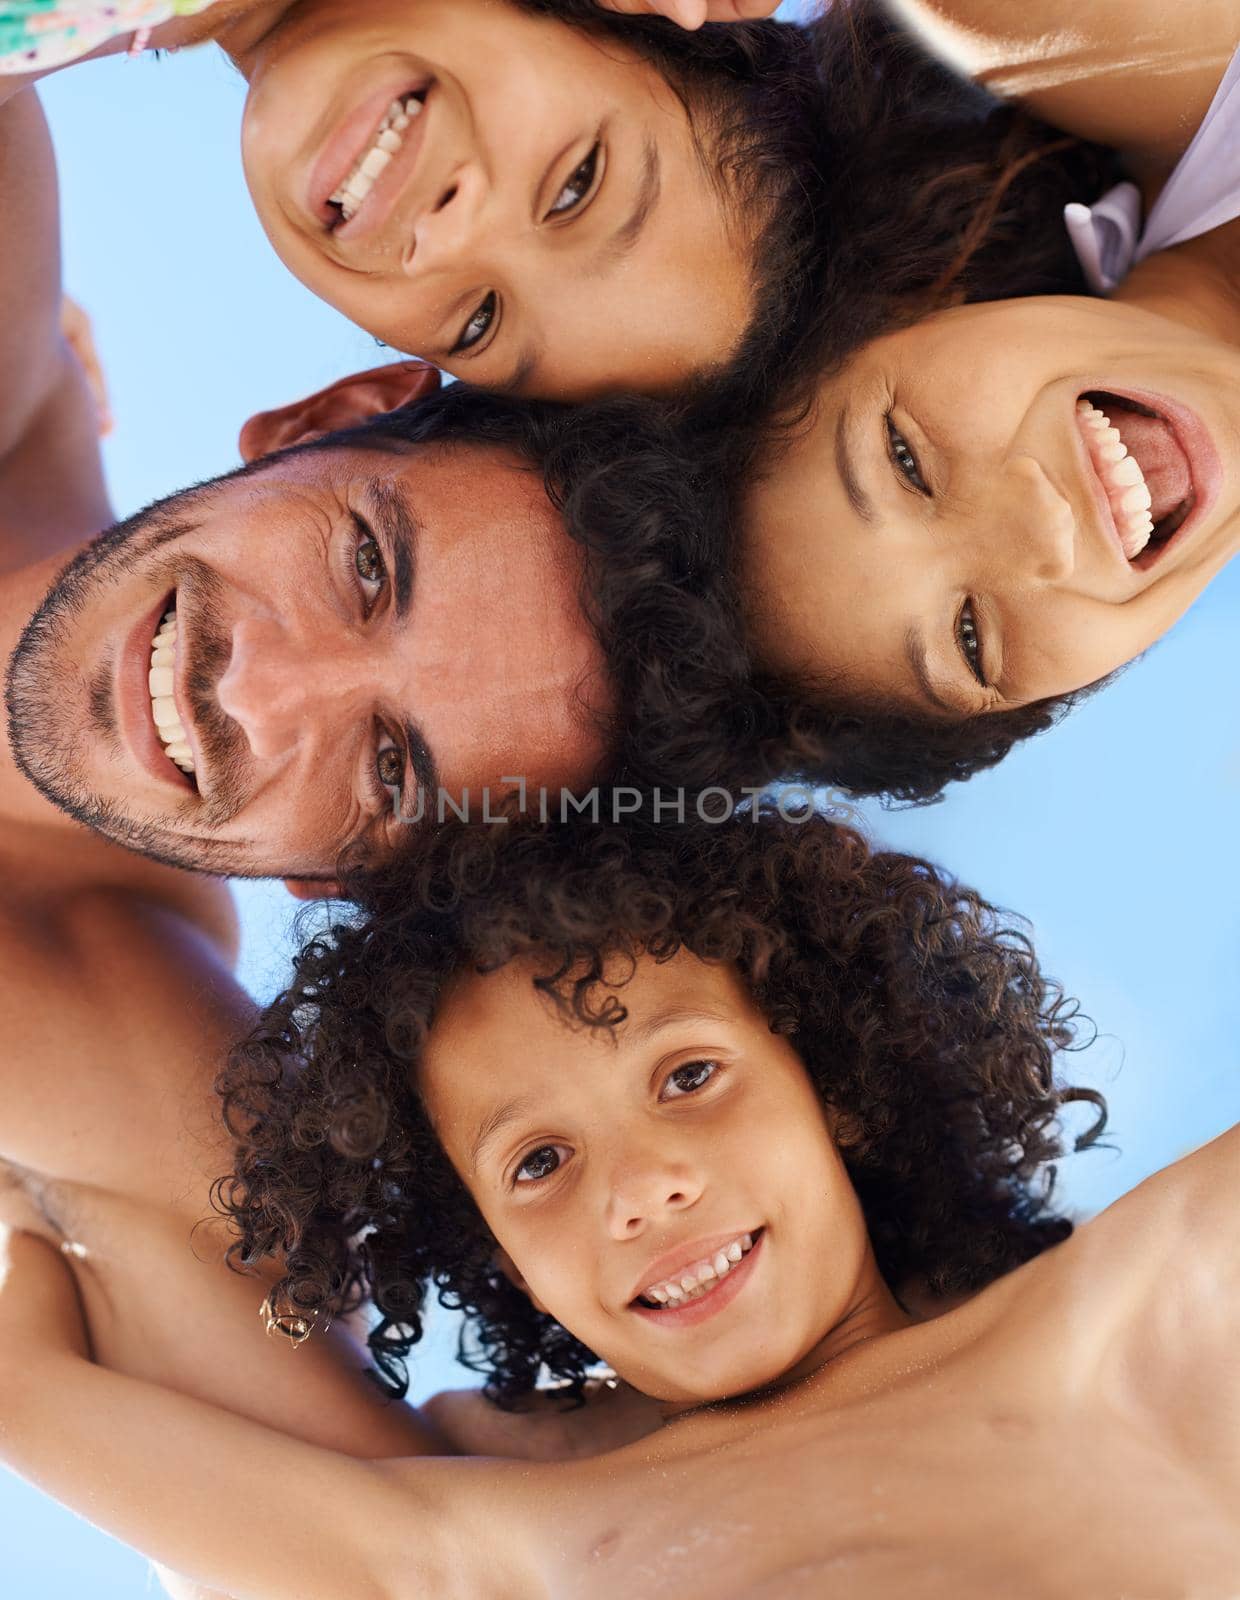 Theyre a close young family. A family of four in swimwear smiling against a bright sky. by YuriArcurs